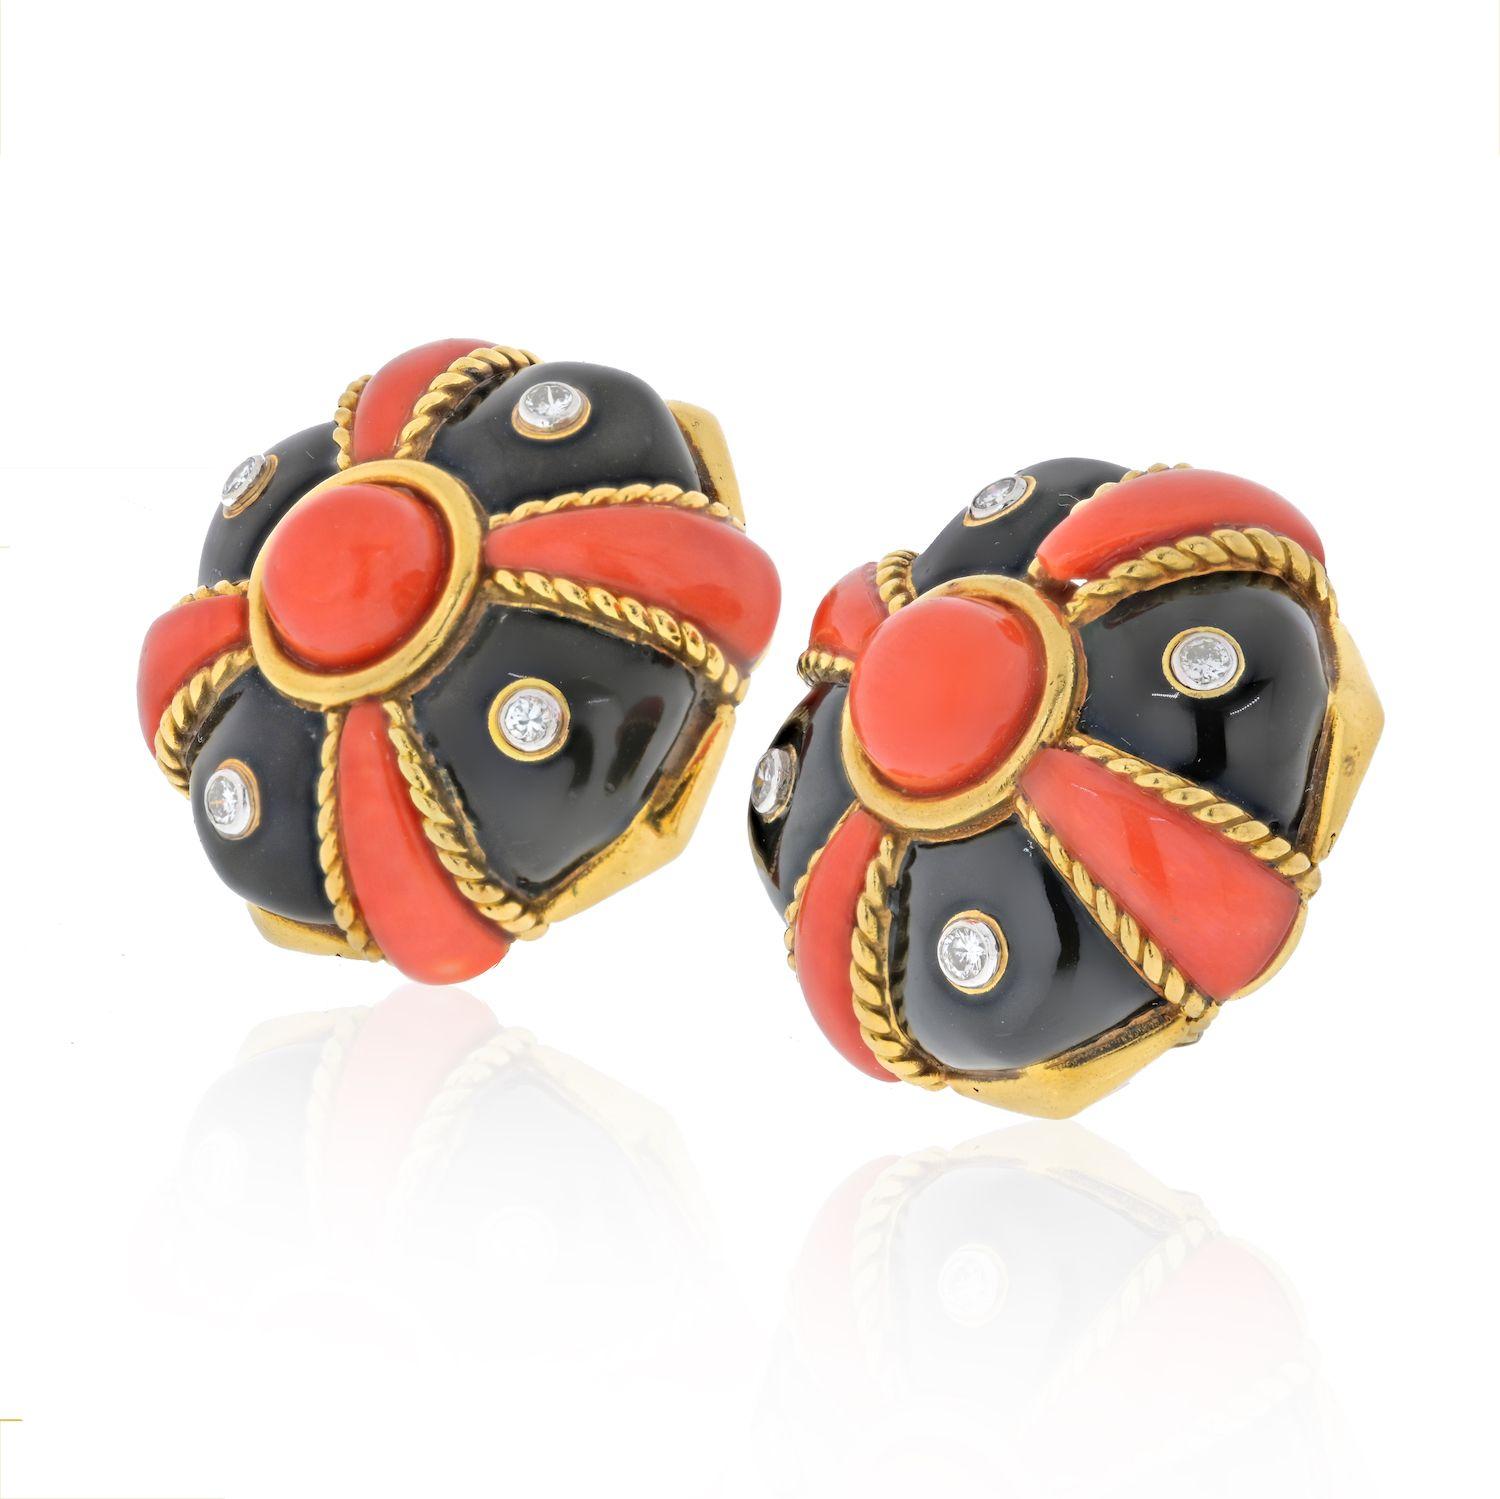 This outstanding pair of WEBB earrings are a visually
delightful and rare model. The eight fine quality brilliant
cut diamonds with an approximate total weight of .50ct,
are set in platinum. The center cabochons are vivid
Mediterranean orange coral,